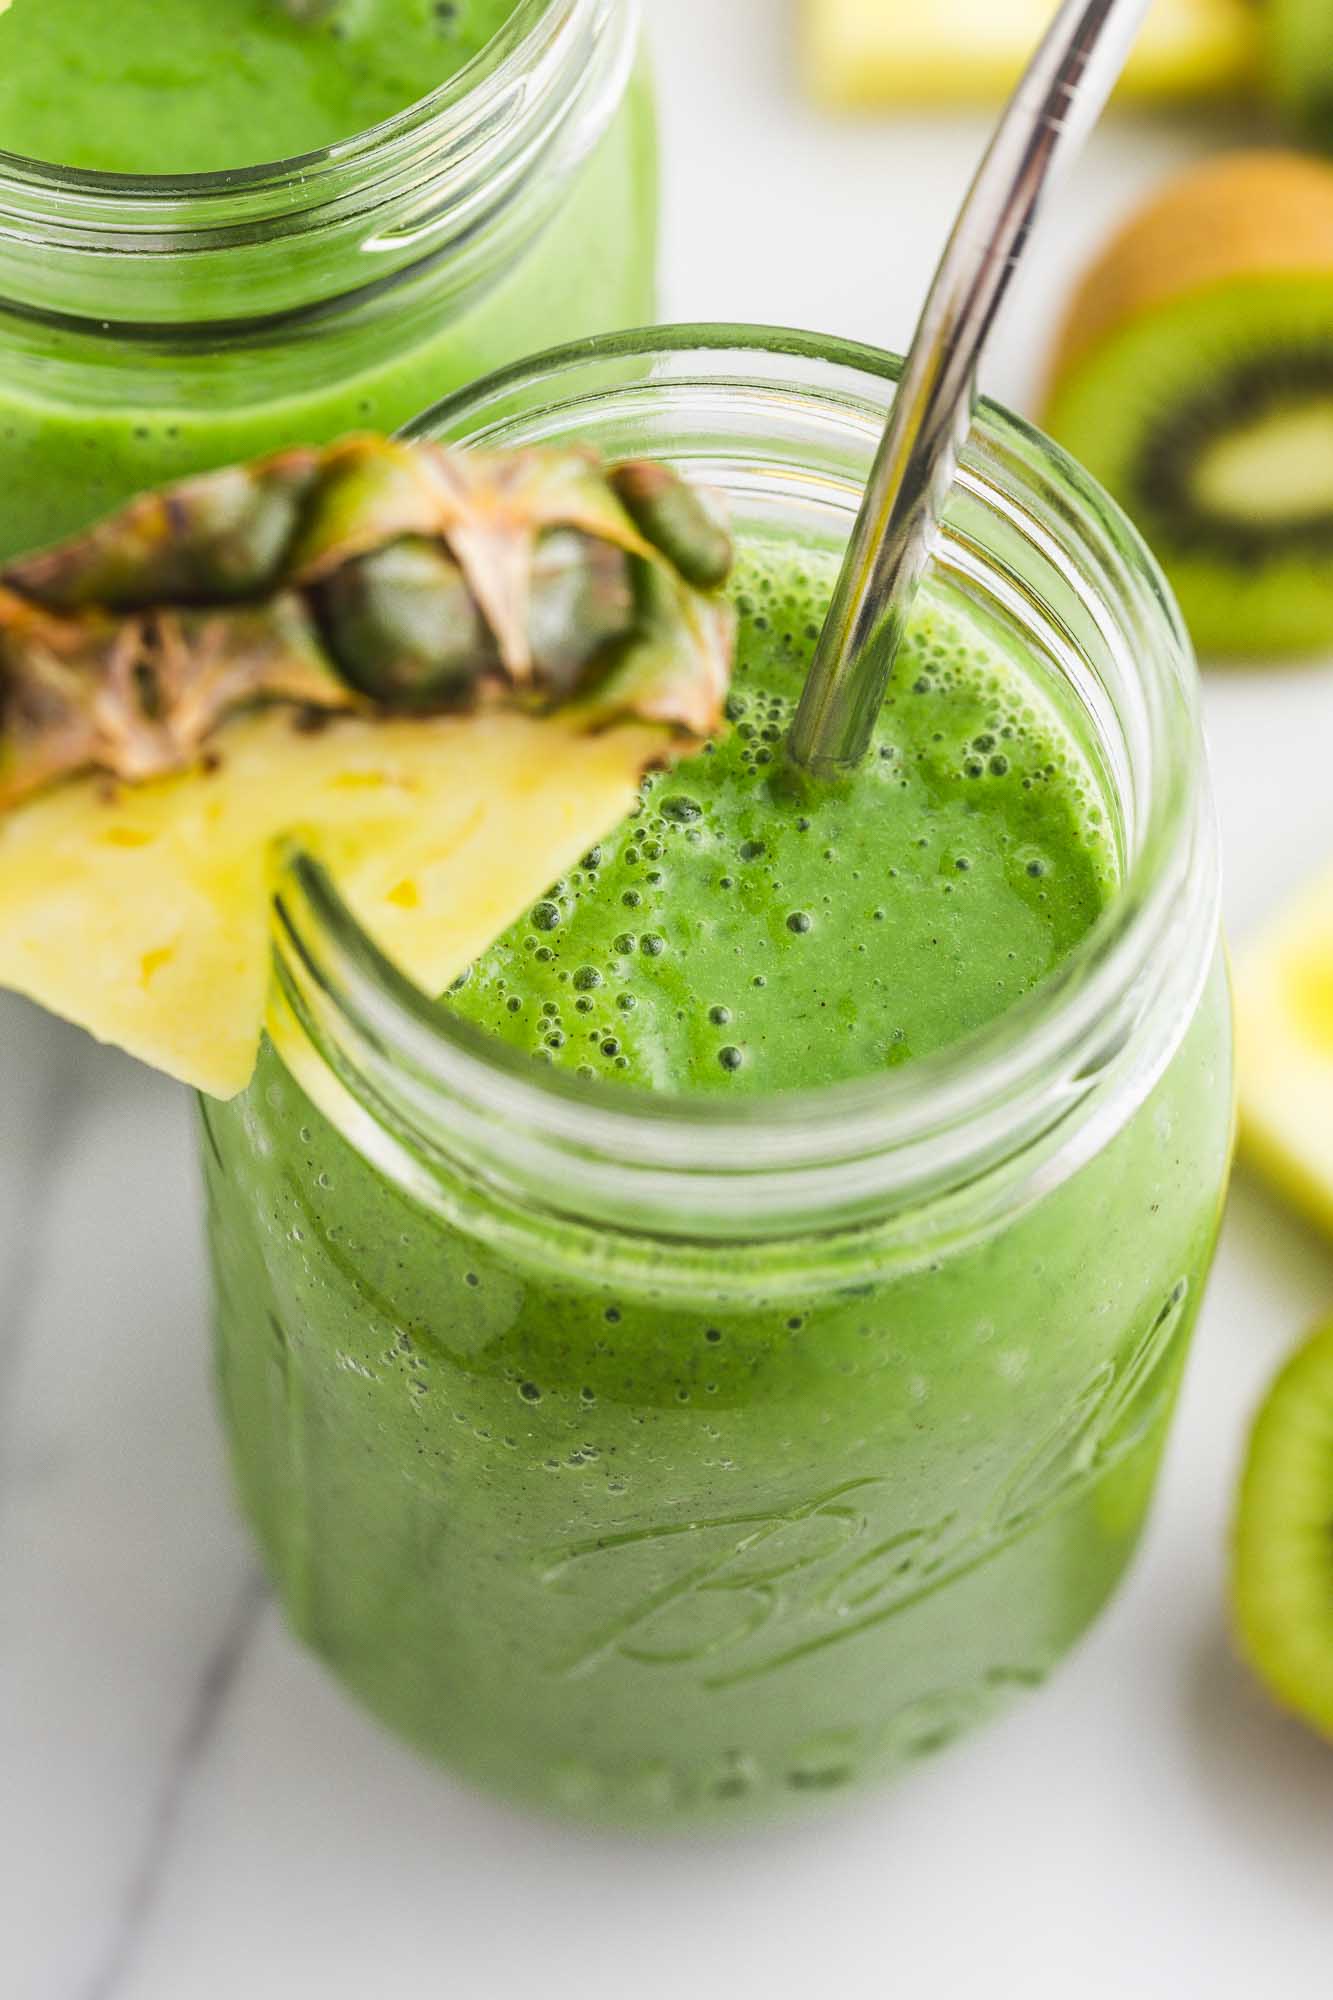 Spinach pineapple smoothie in a mason jar, served with a slice of fresh pineapple and a metal straw